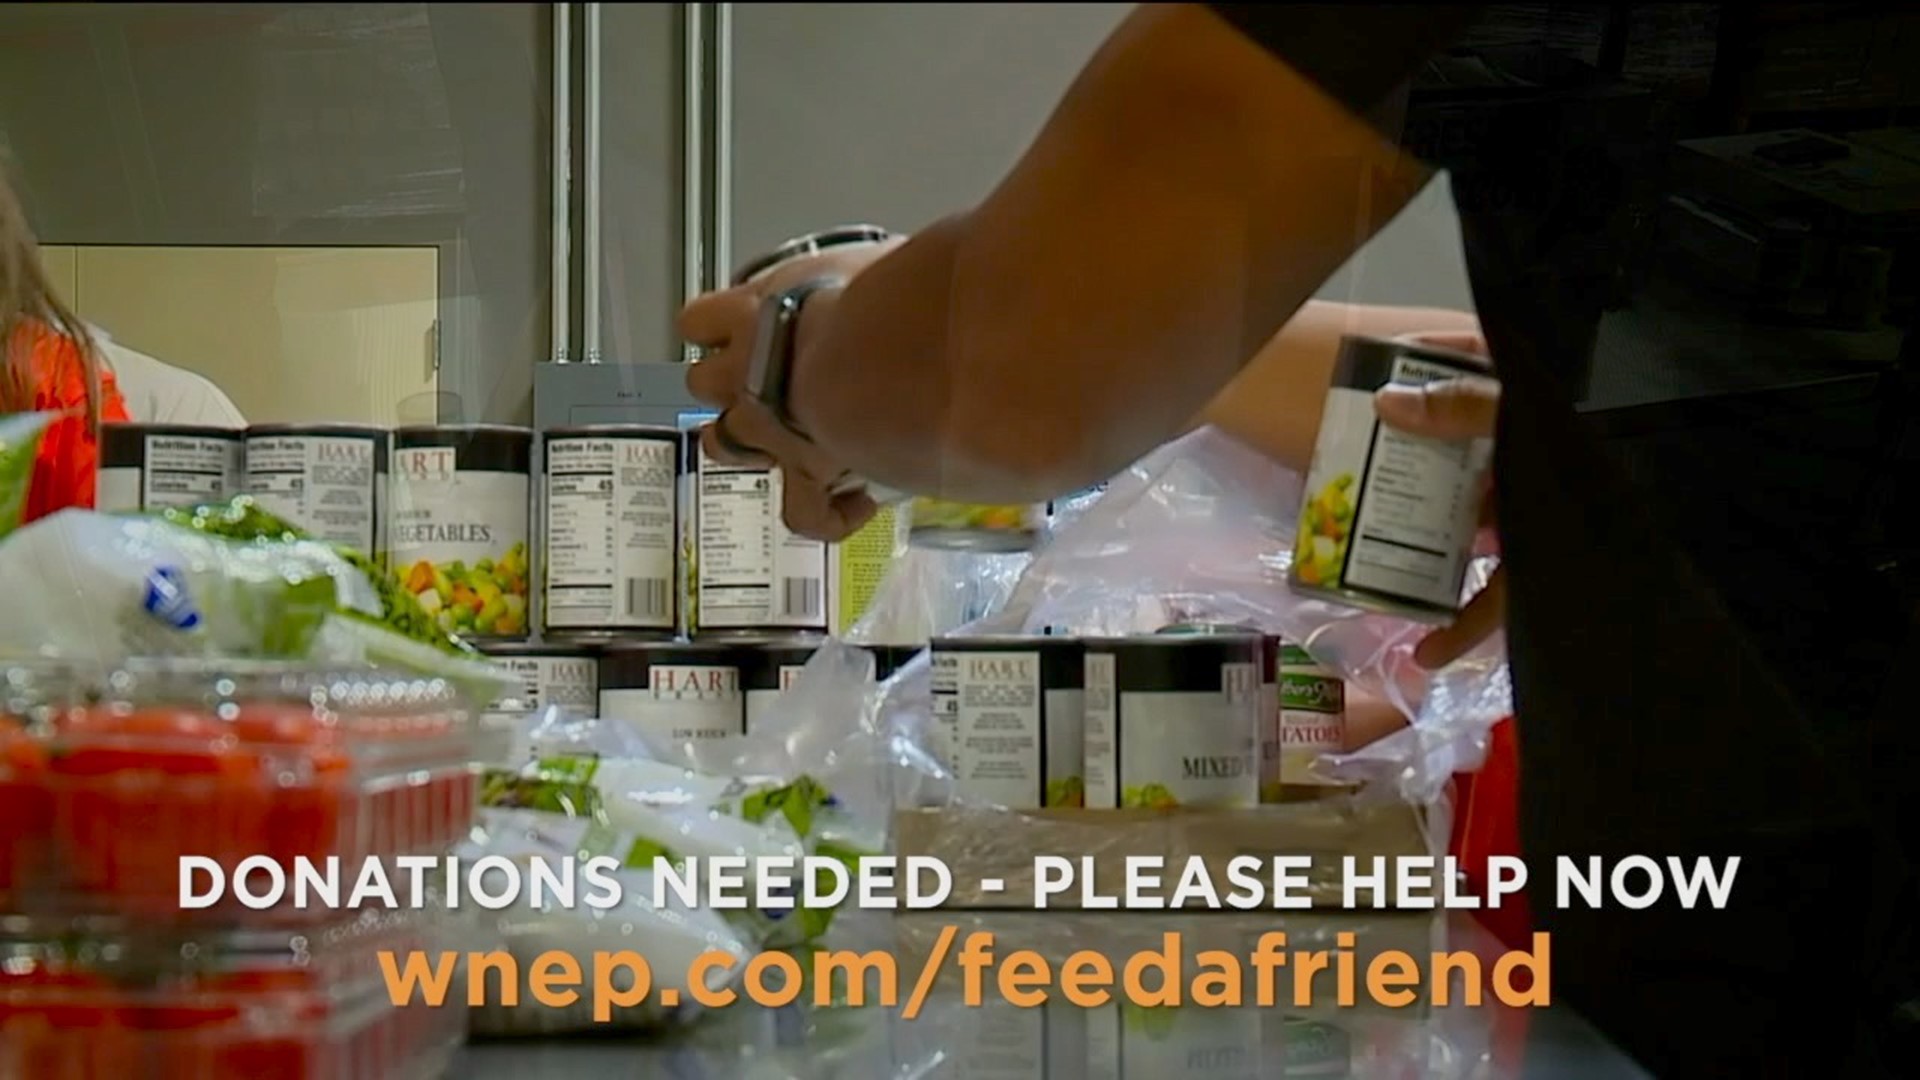 Together we can help feed our friends!